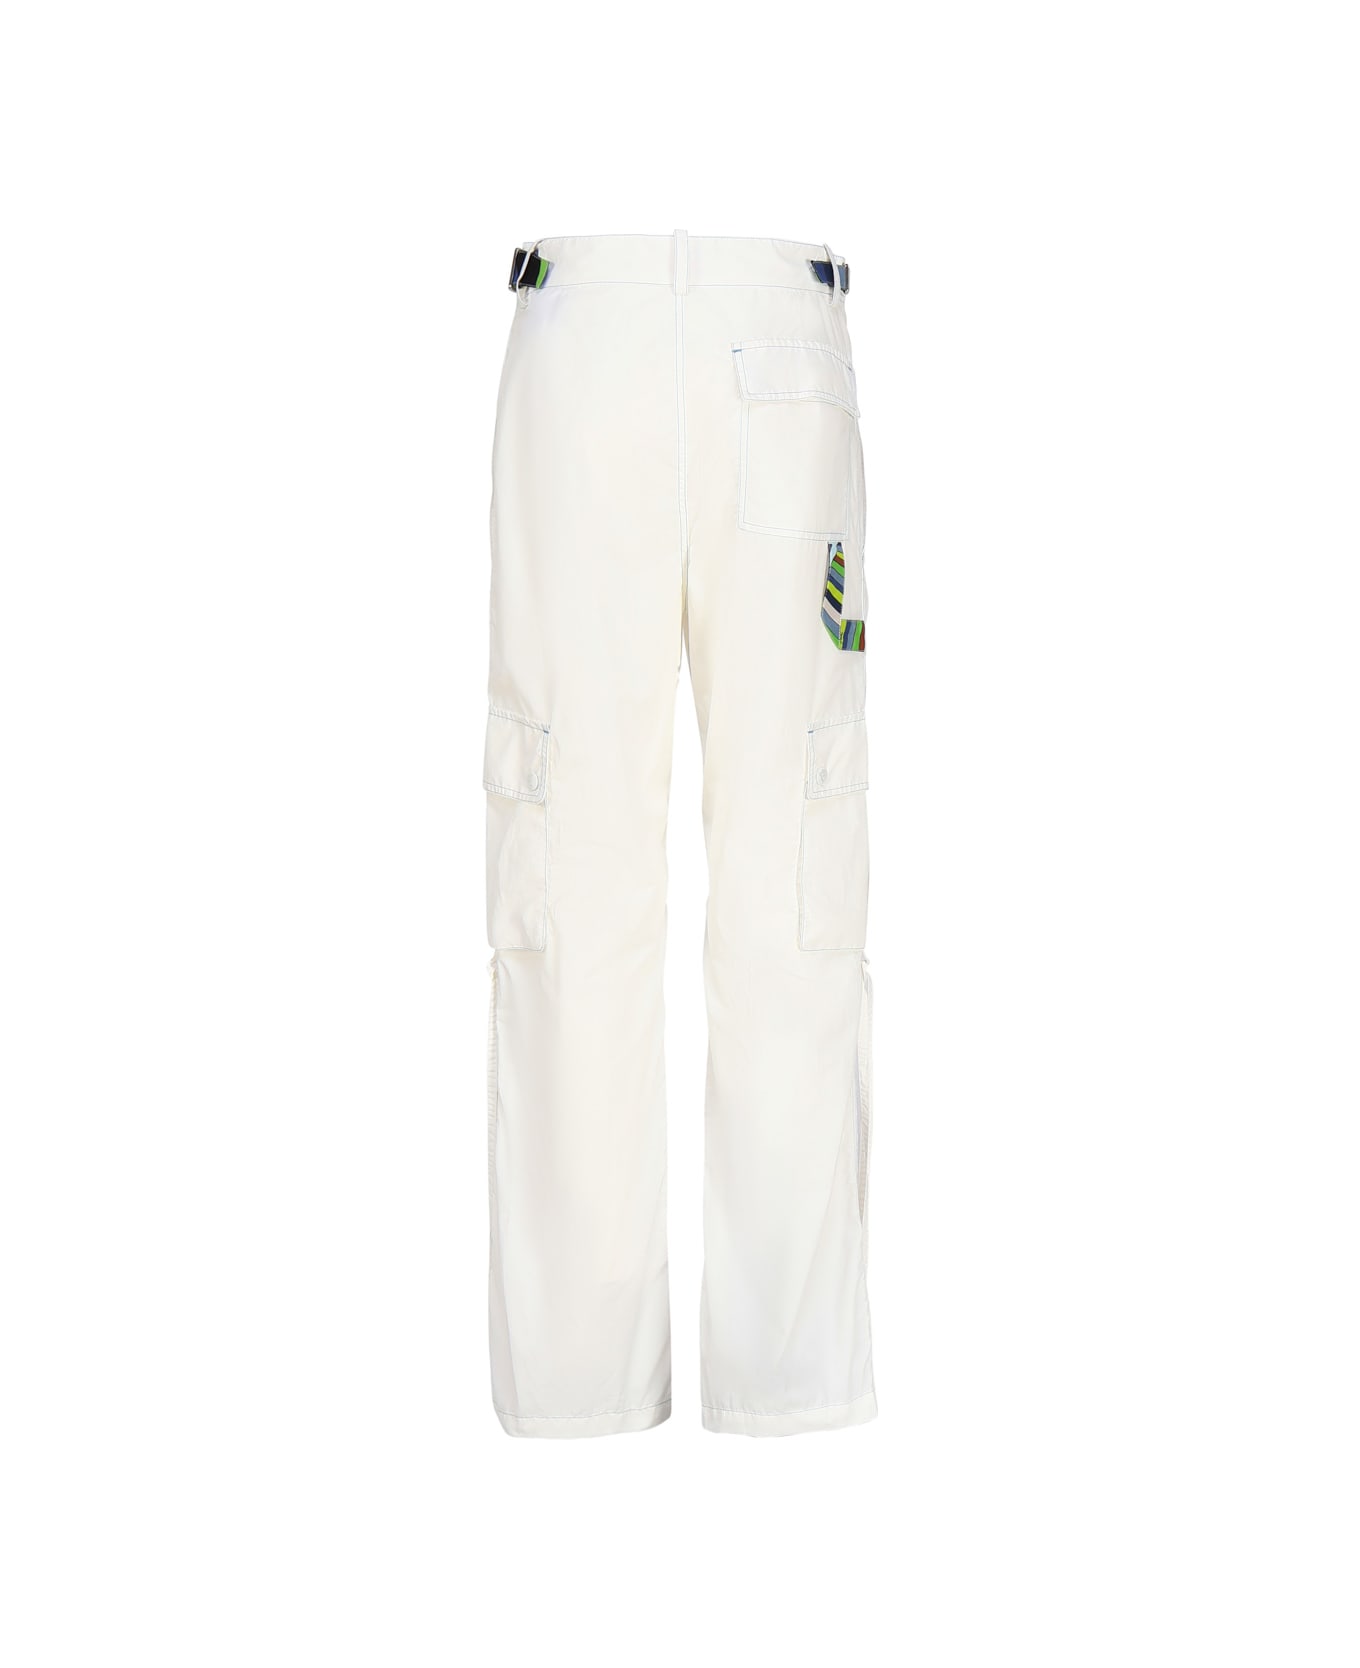 Pucci Iride Cargo Trousers ボトムス